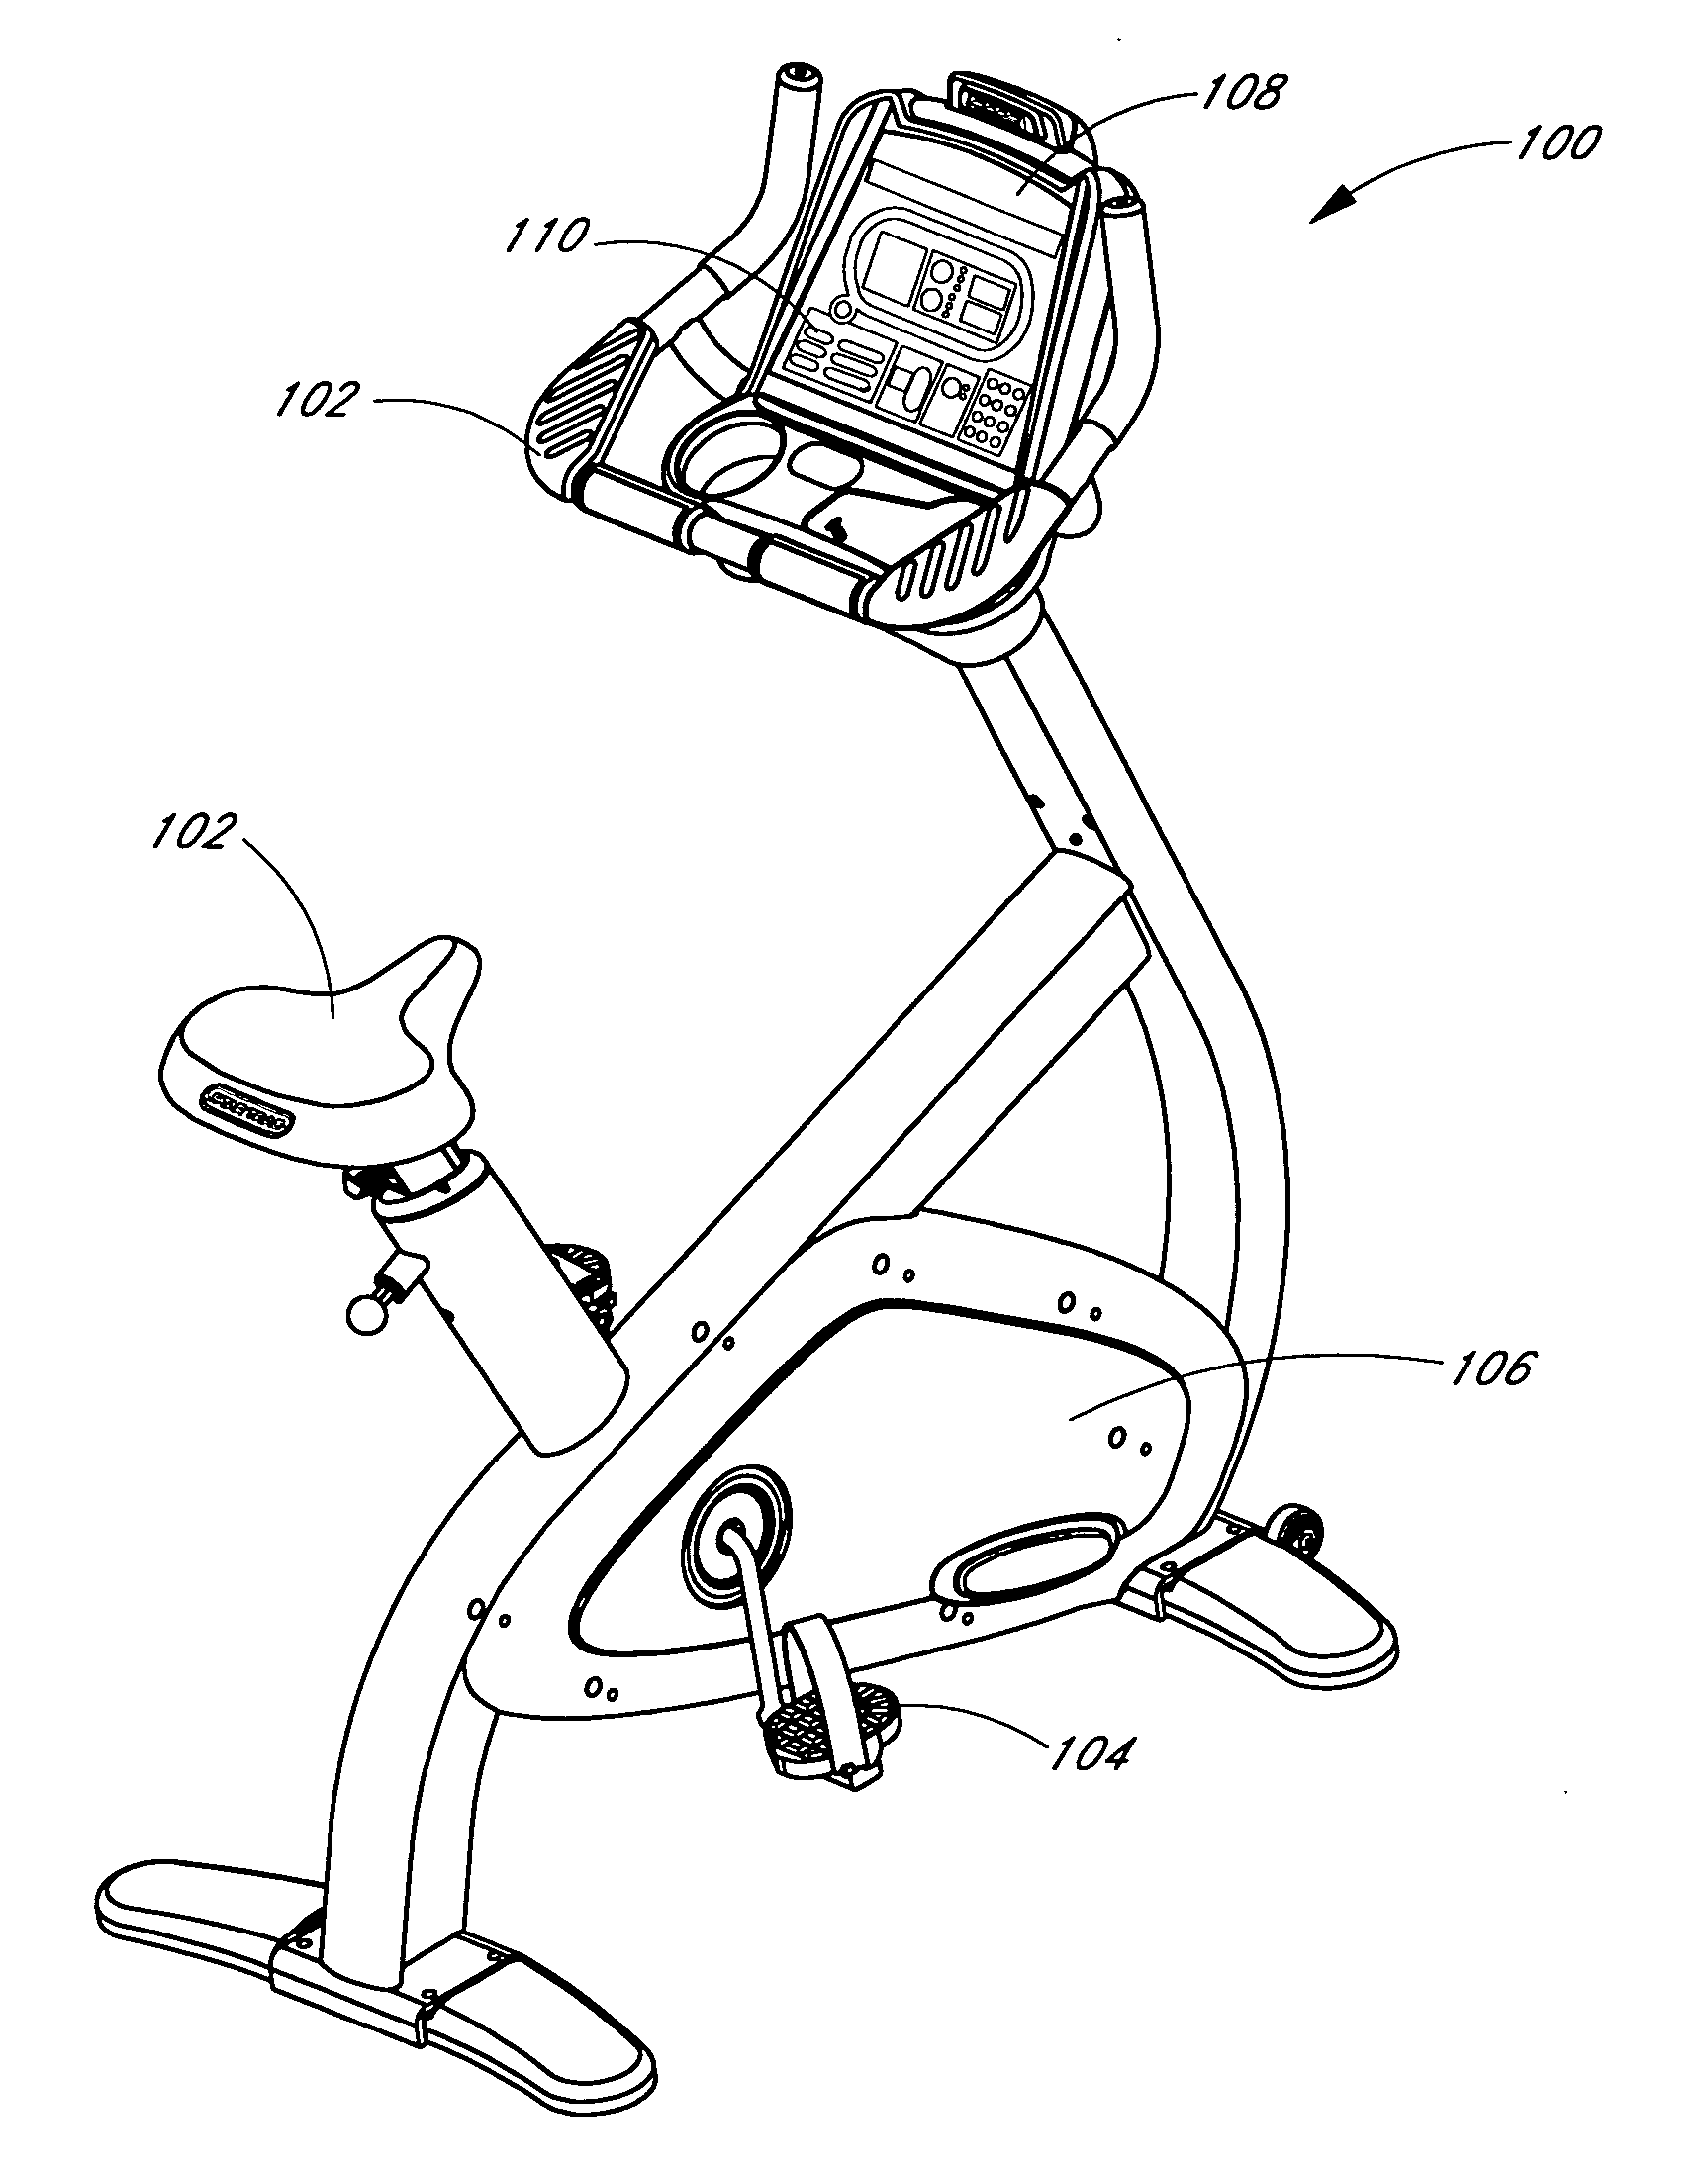 Load variance system and method for exercise machine